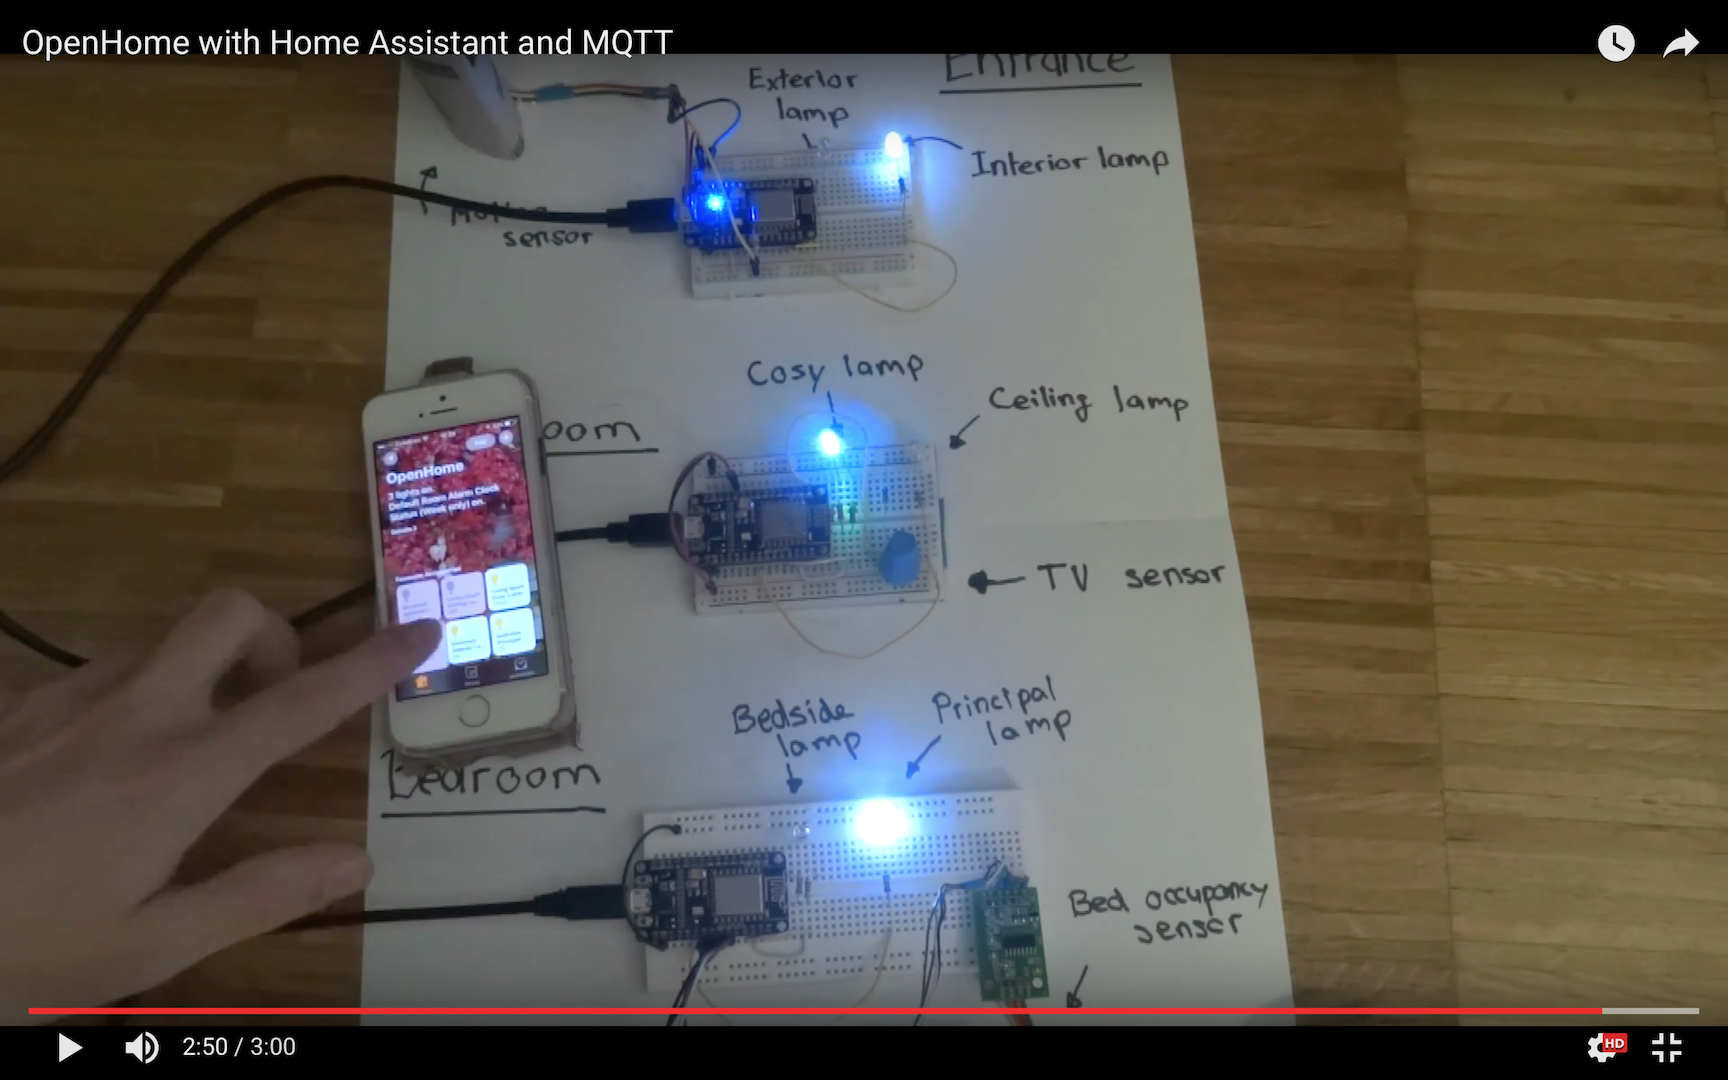 OpenHome with Home Assistant and MQTT